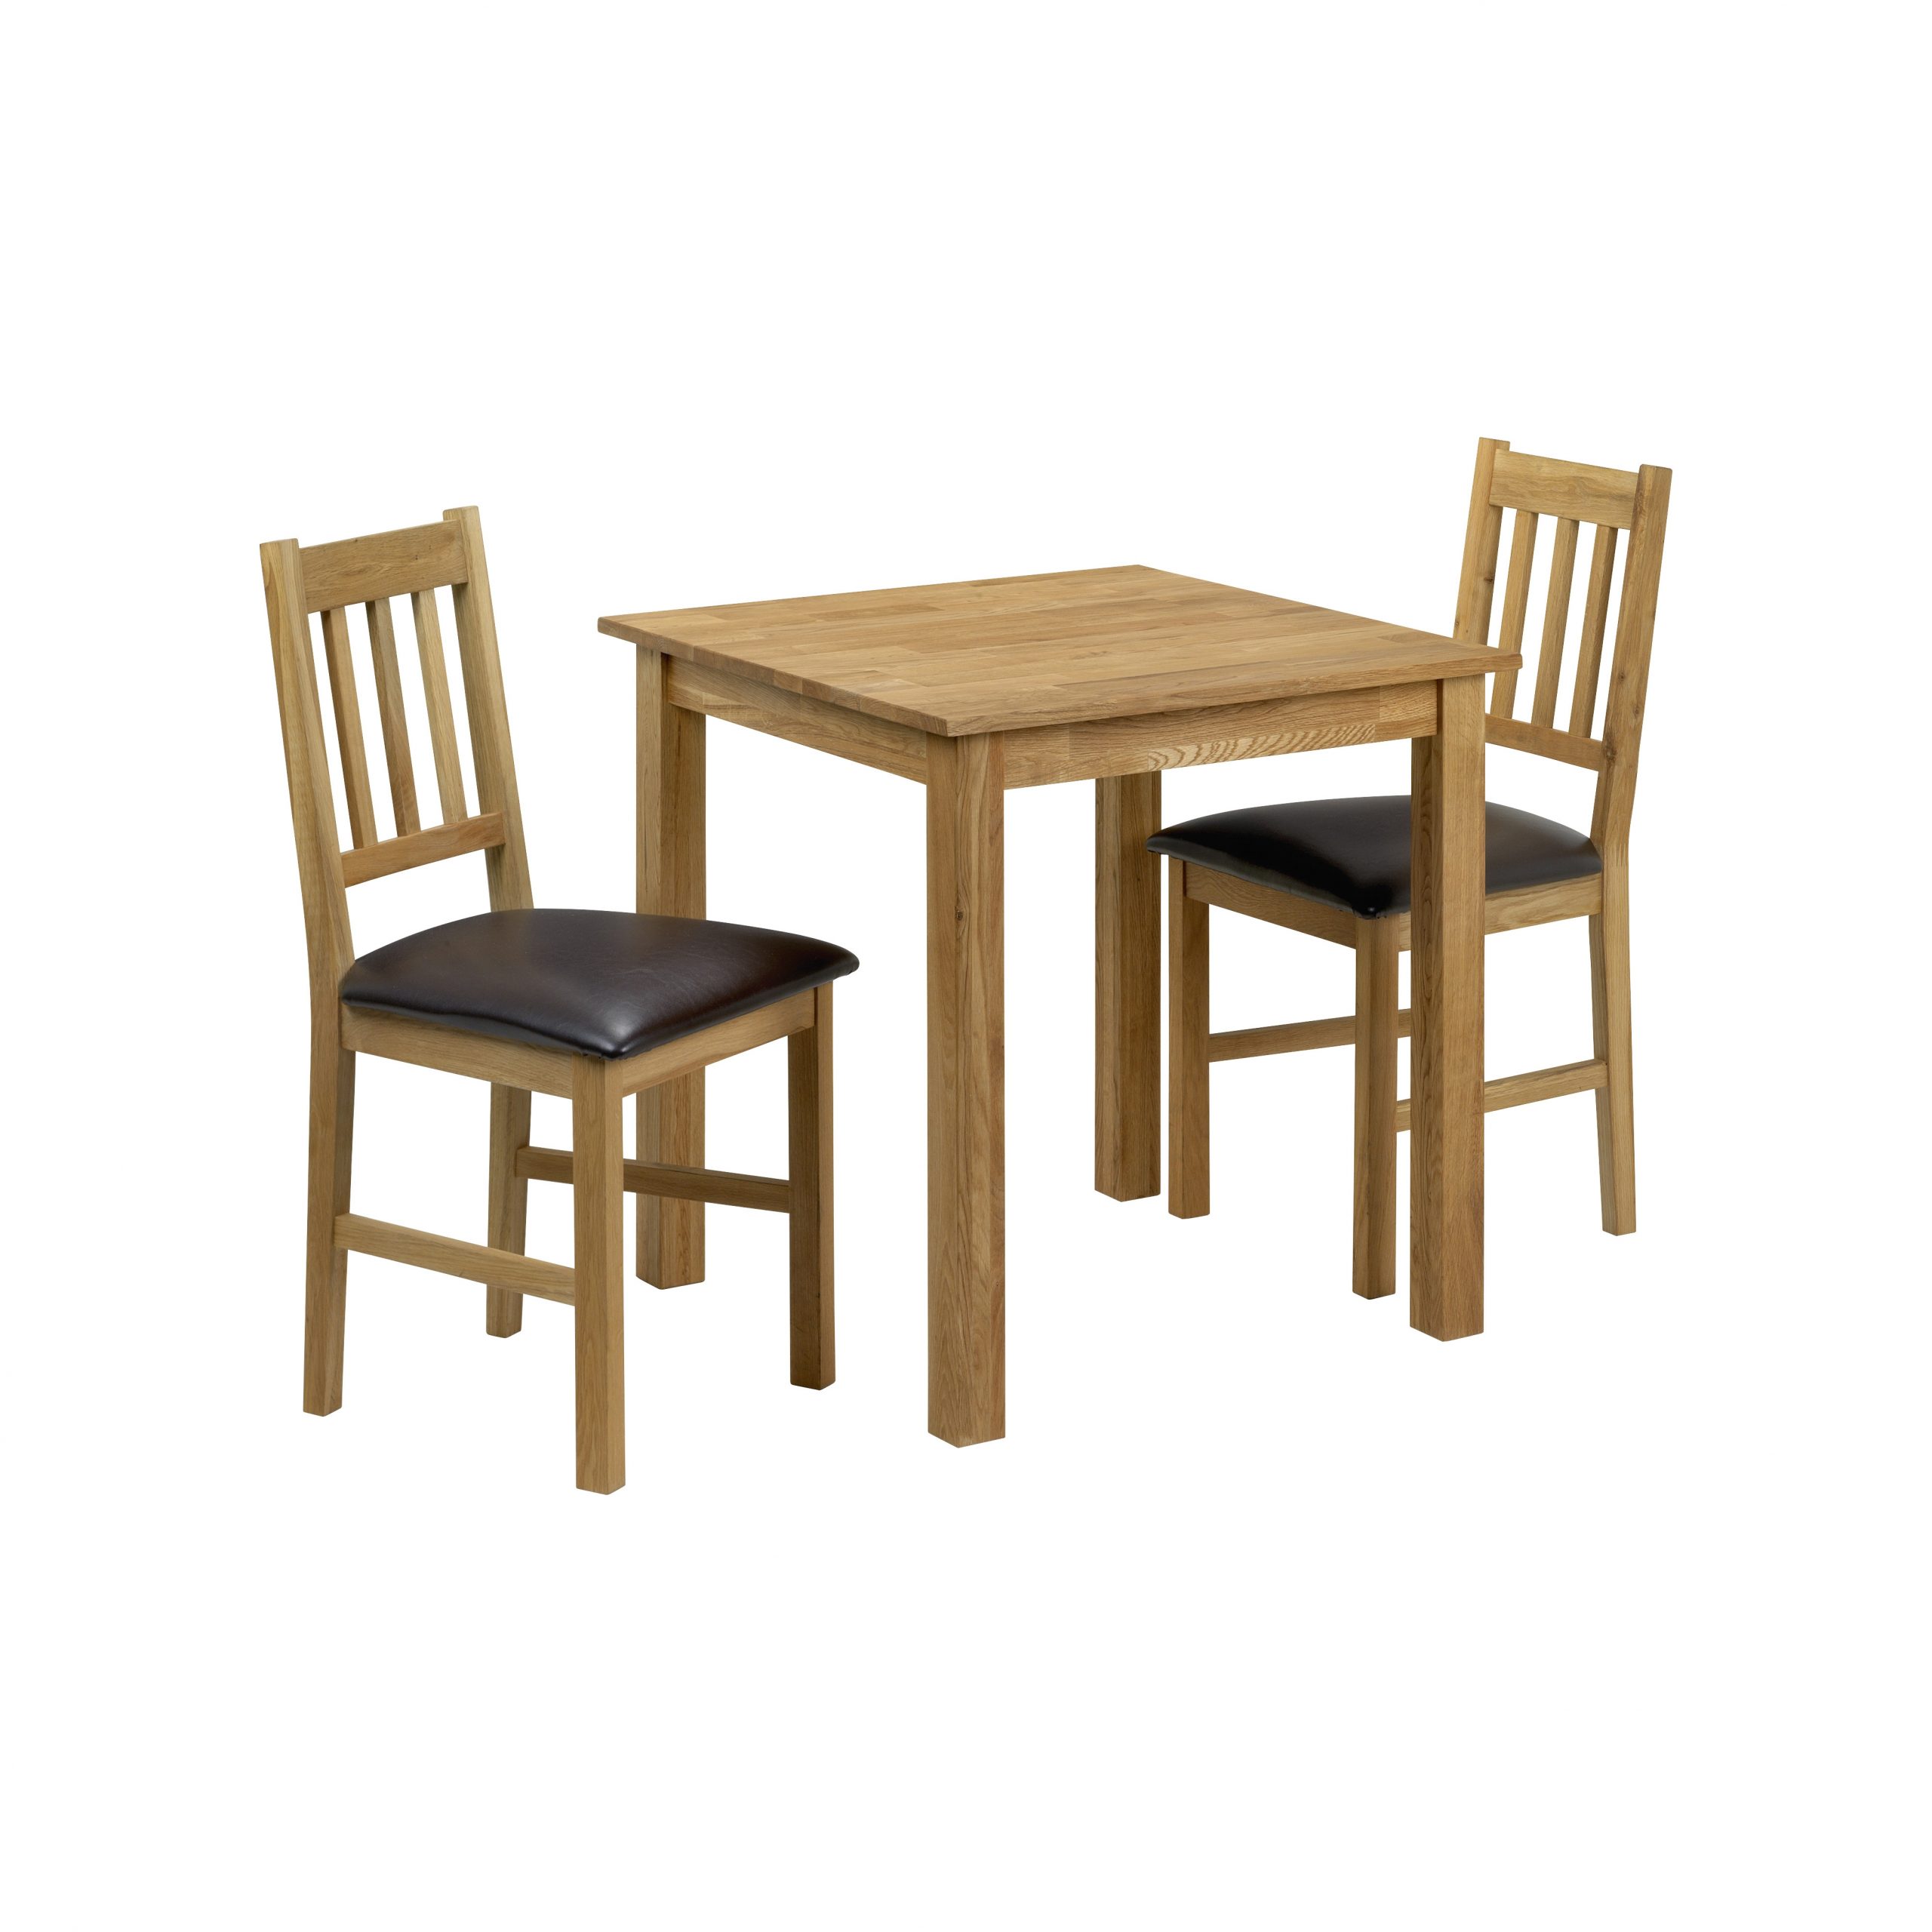 Interior Space Saving Dining Sets Next Day Delivery Space intended for measurements 3981 X 3981